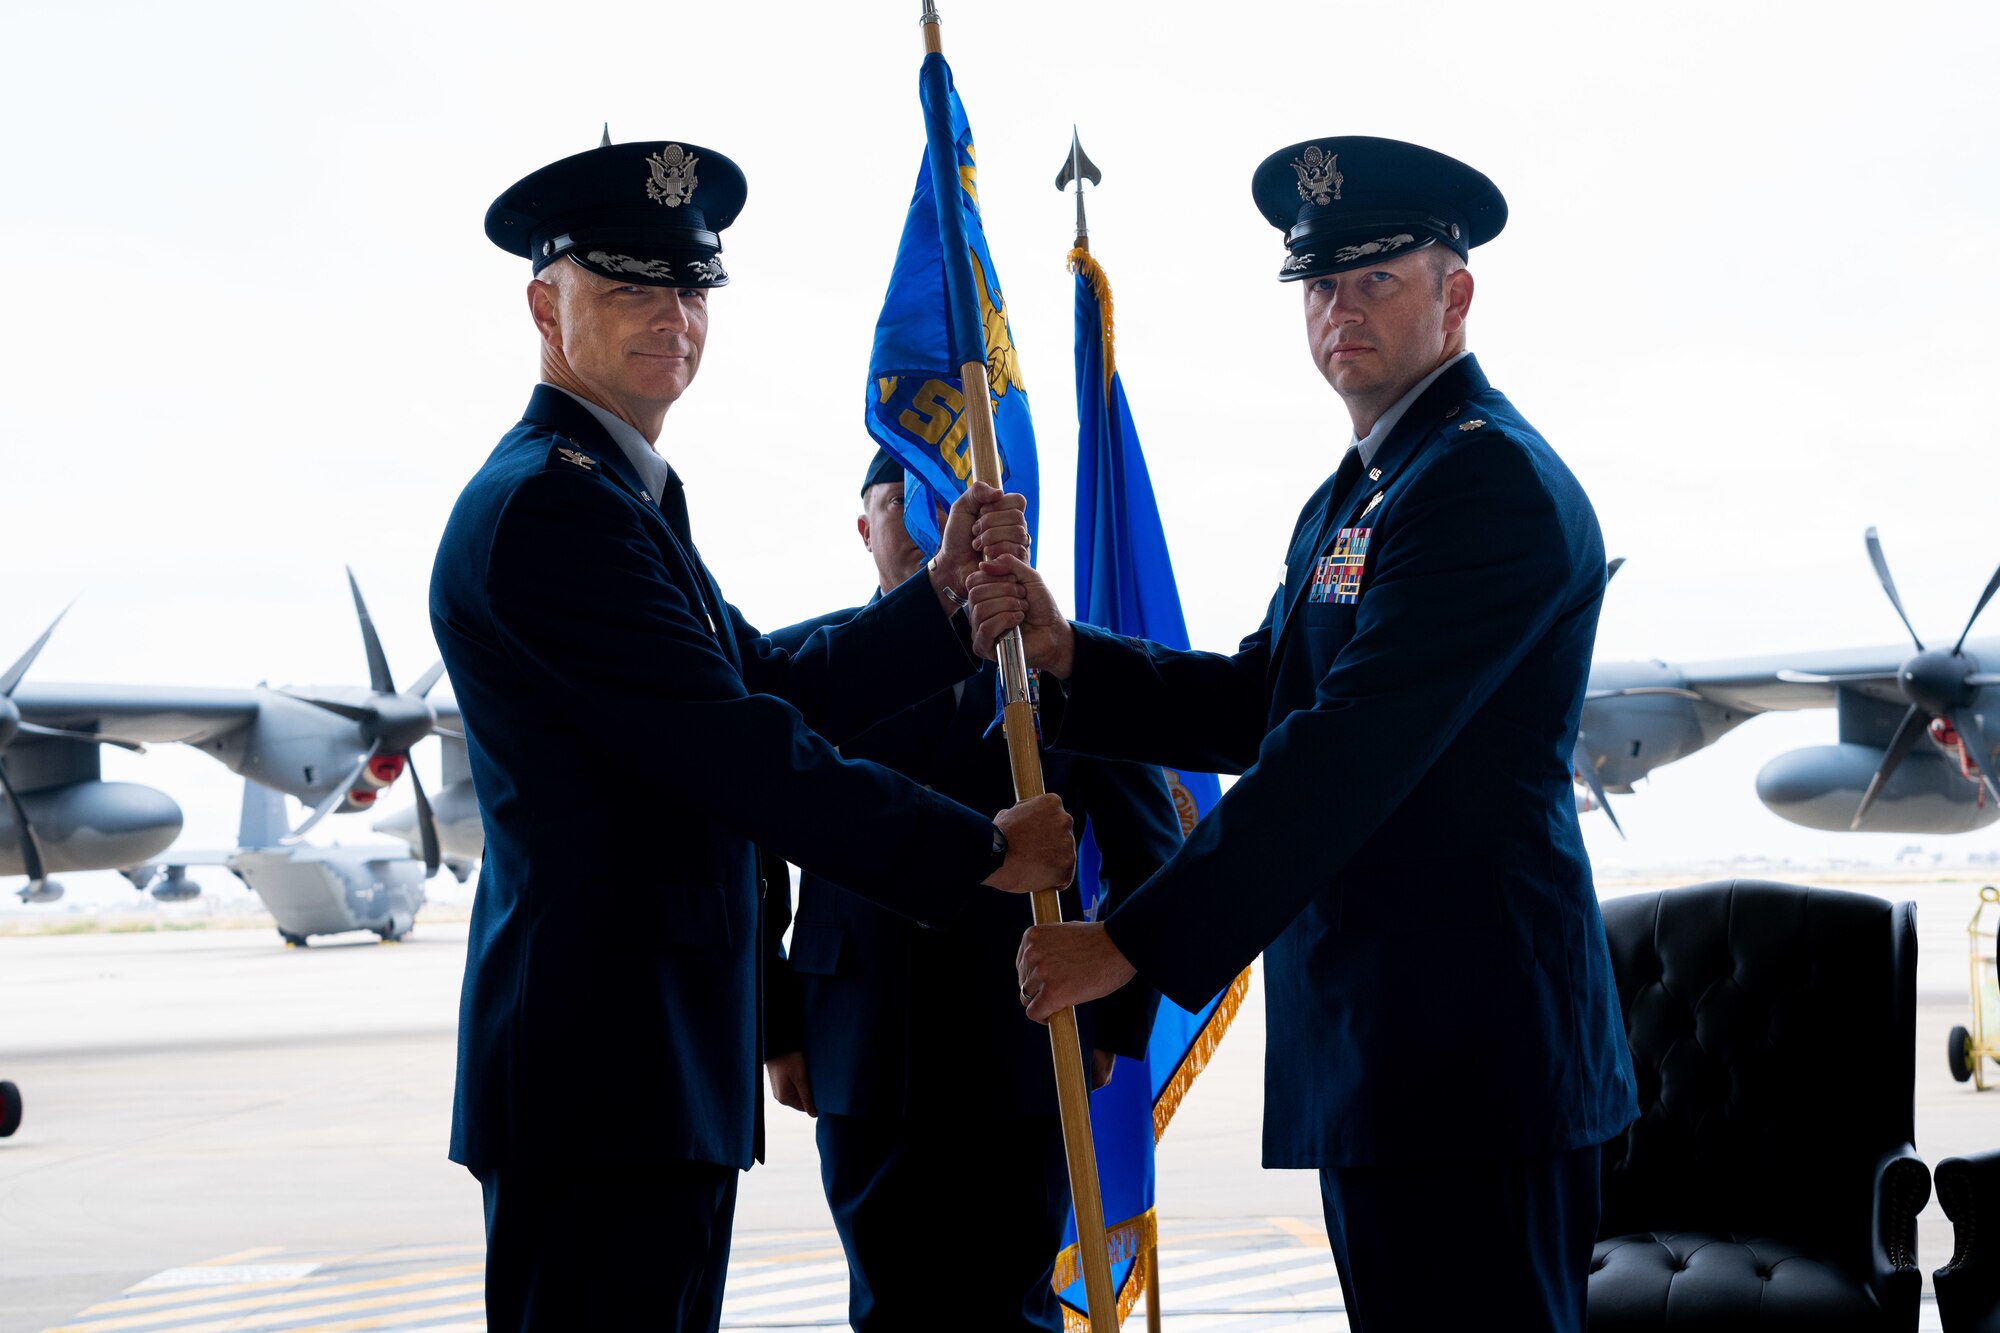 Lt. Col. Michael Roy, 6th Special Operations Squadron commander, receives the squadron guidon from Col. Michael Shreves, 27th Special Operations Group commander, during the 6 SOS activation at Cannon Air Force Base, N.M., Oct. 6, 2022. Previously the 27 SOG Detachment 1, the 6 SOS is an MC-130J Commando II aircraft flying unit that fulfills the 27th Special Operations Wing’s commitment to the Air Force Special Operations Command’s new deployment model. (U.S. Air Force photo by Airman 1st Class Cassidy Daniel)